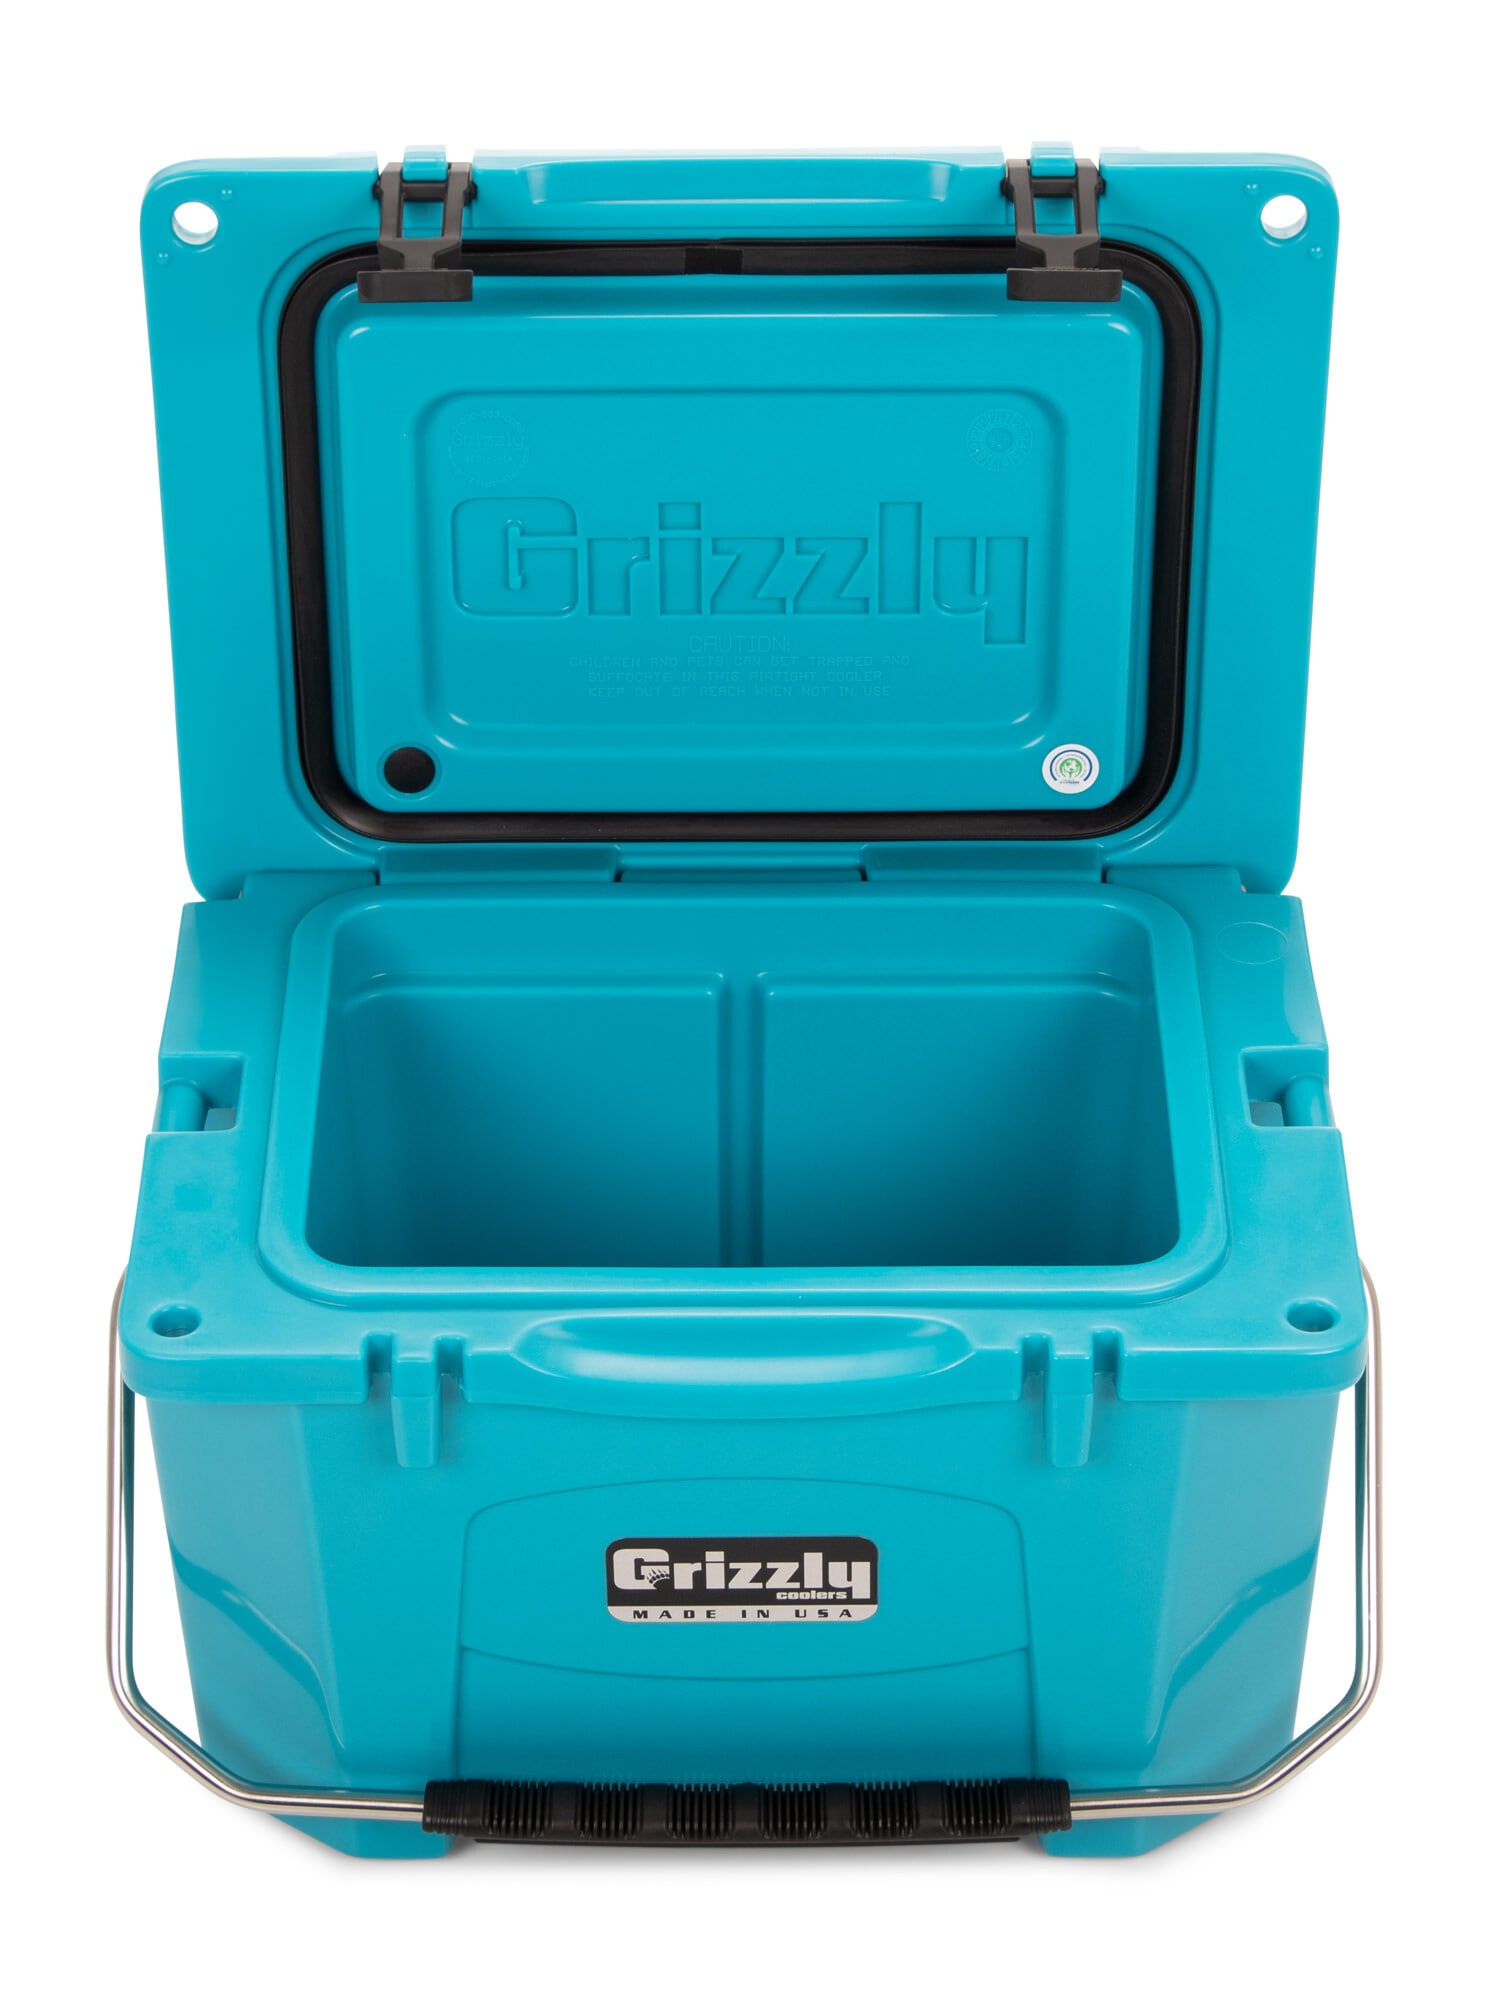 Grizzly – on Aquaboard